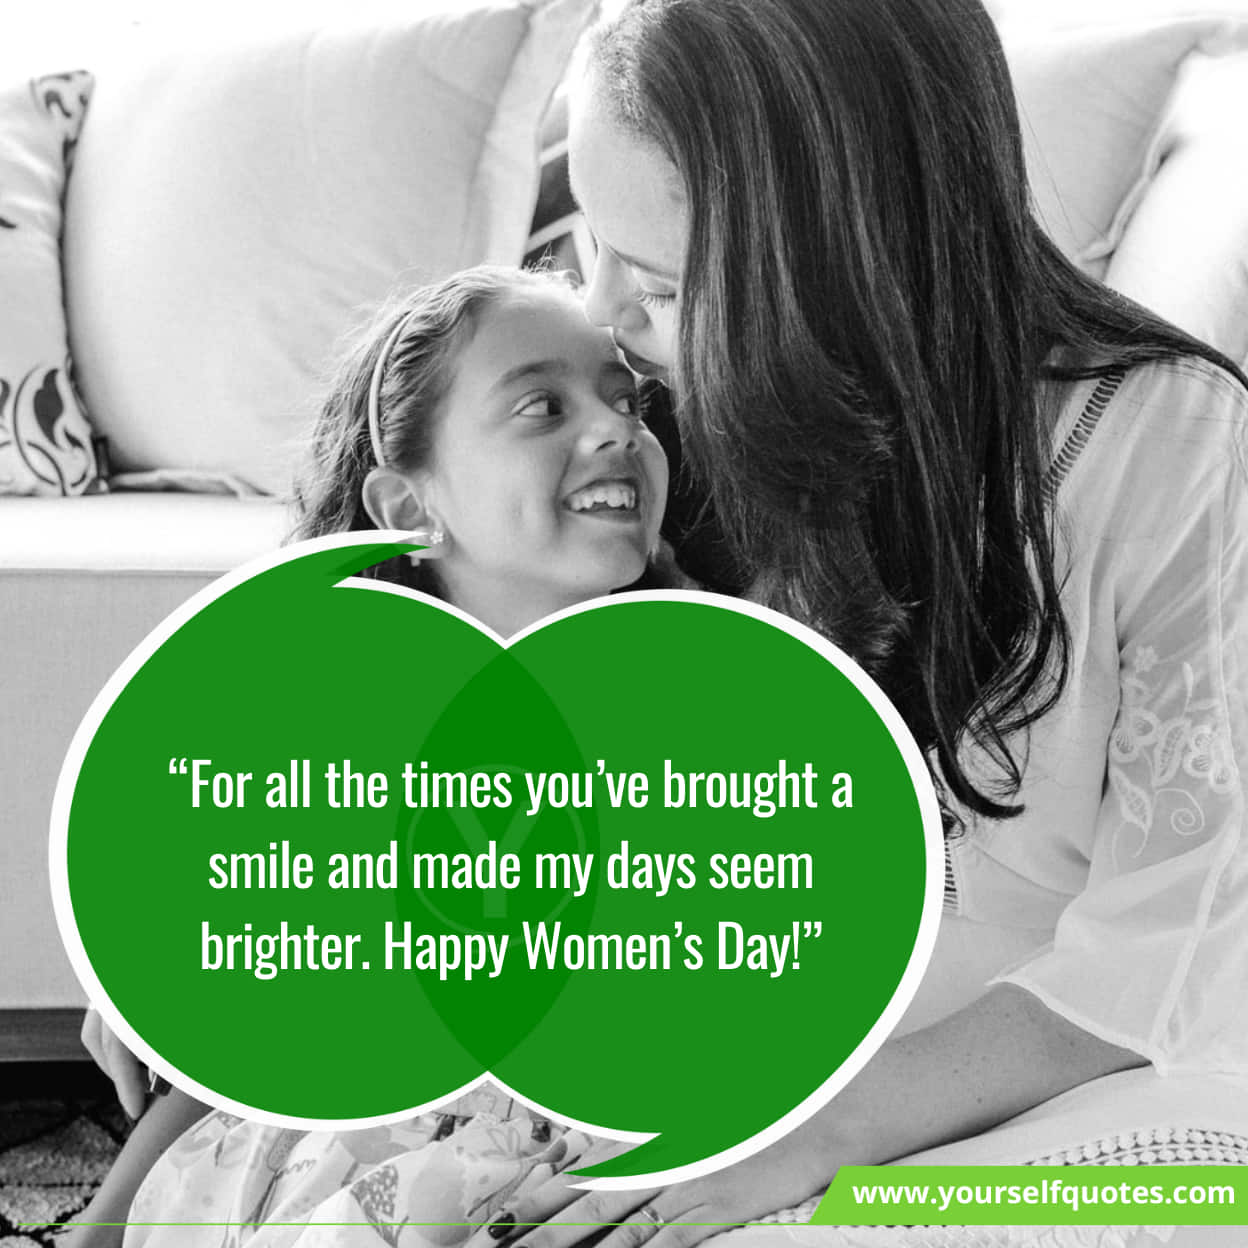 Best Wishes To Daughter On Happy Women's Day